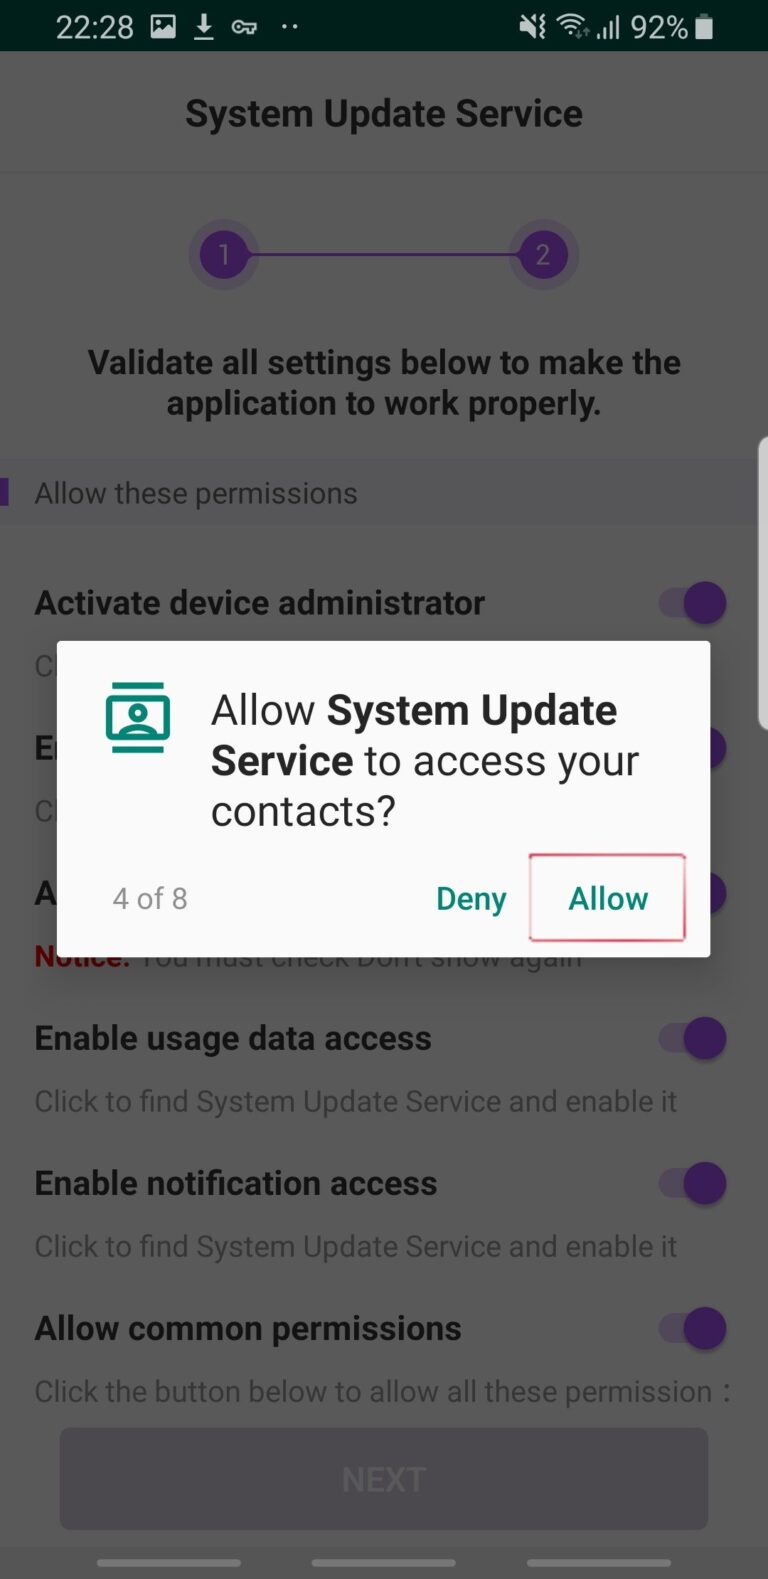 How to Install Aispyer for Android